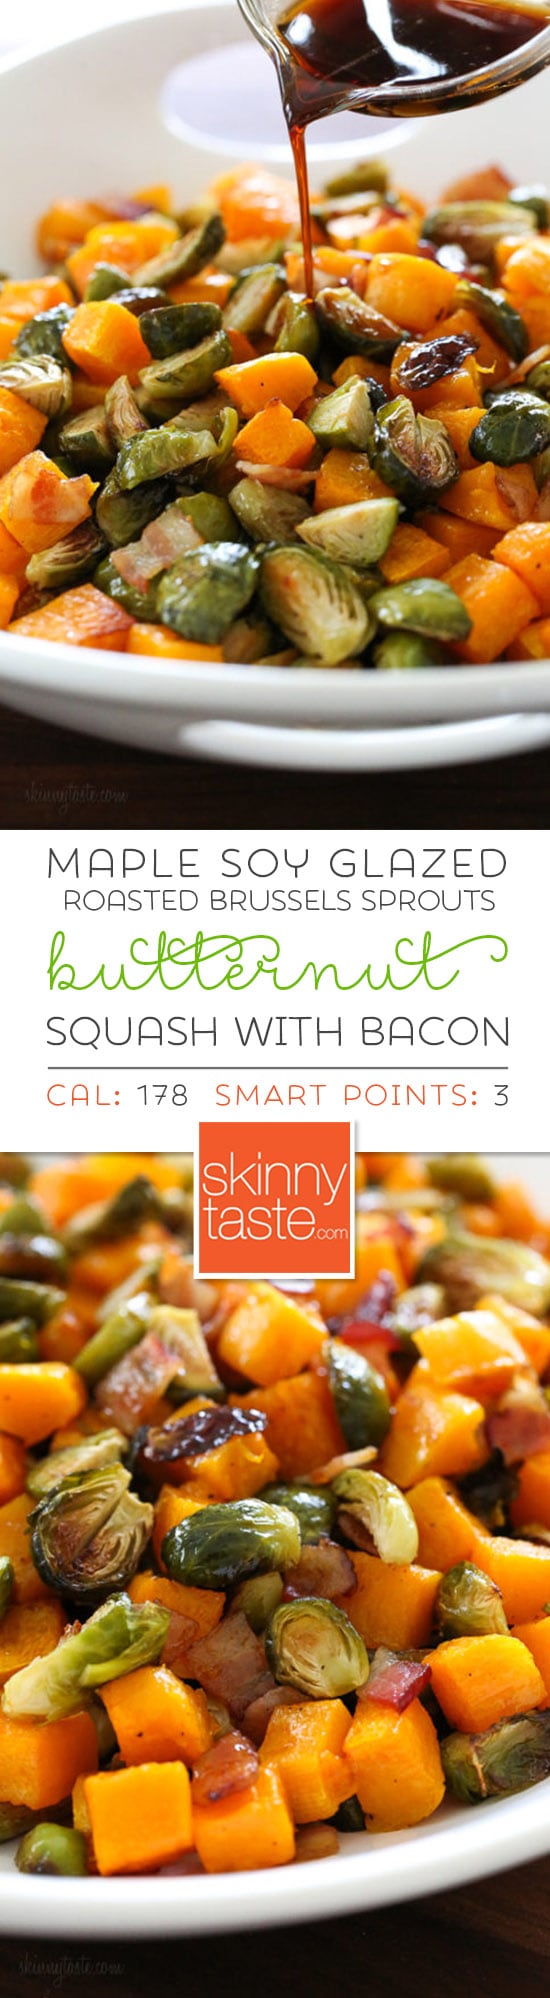 Roasted Brussels Sprouts and Butternut Squash are delicious on their own, but adding bacon and a maple soy glaze makes them over-the-top delicious! Made all on one sheet pan, you can double or triple this recipe to feed a crowd by adding more sheet pans. #maplebrusselssprouts #brusselssprouts #butternut squash